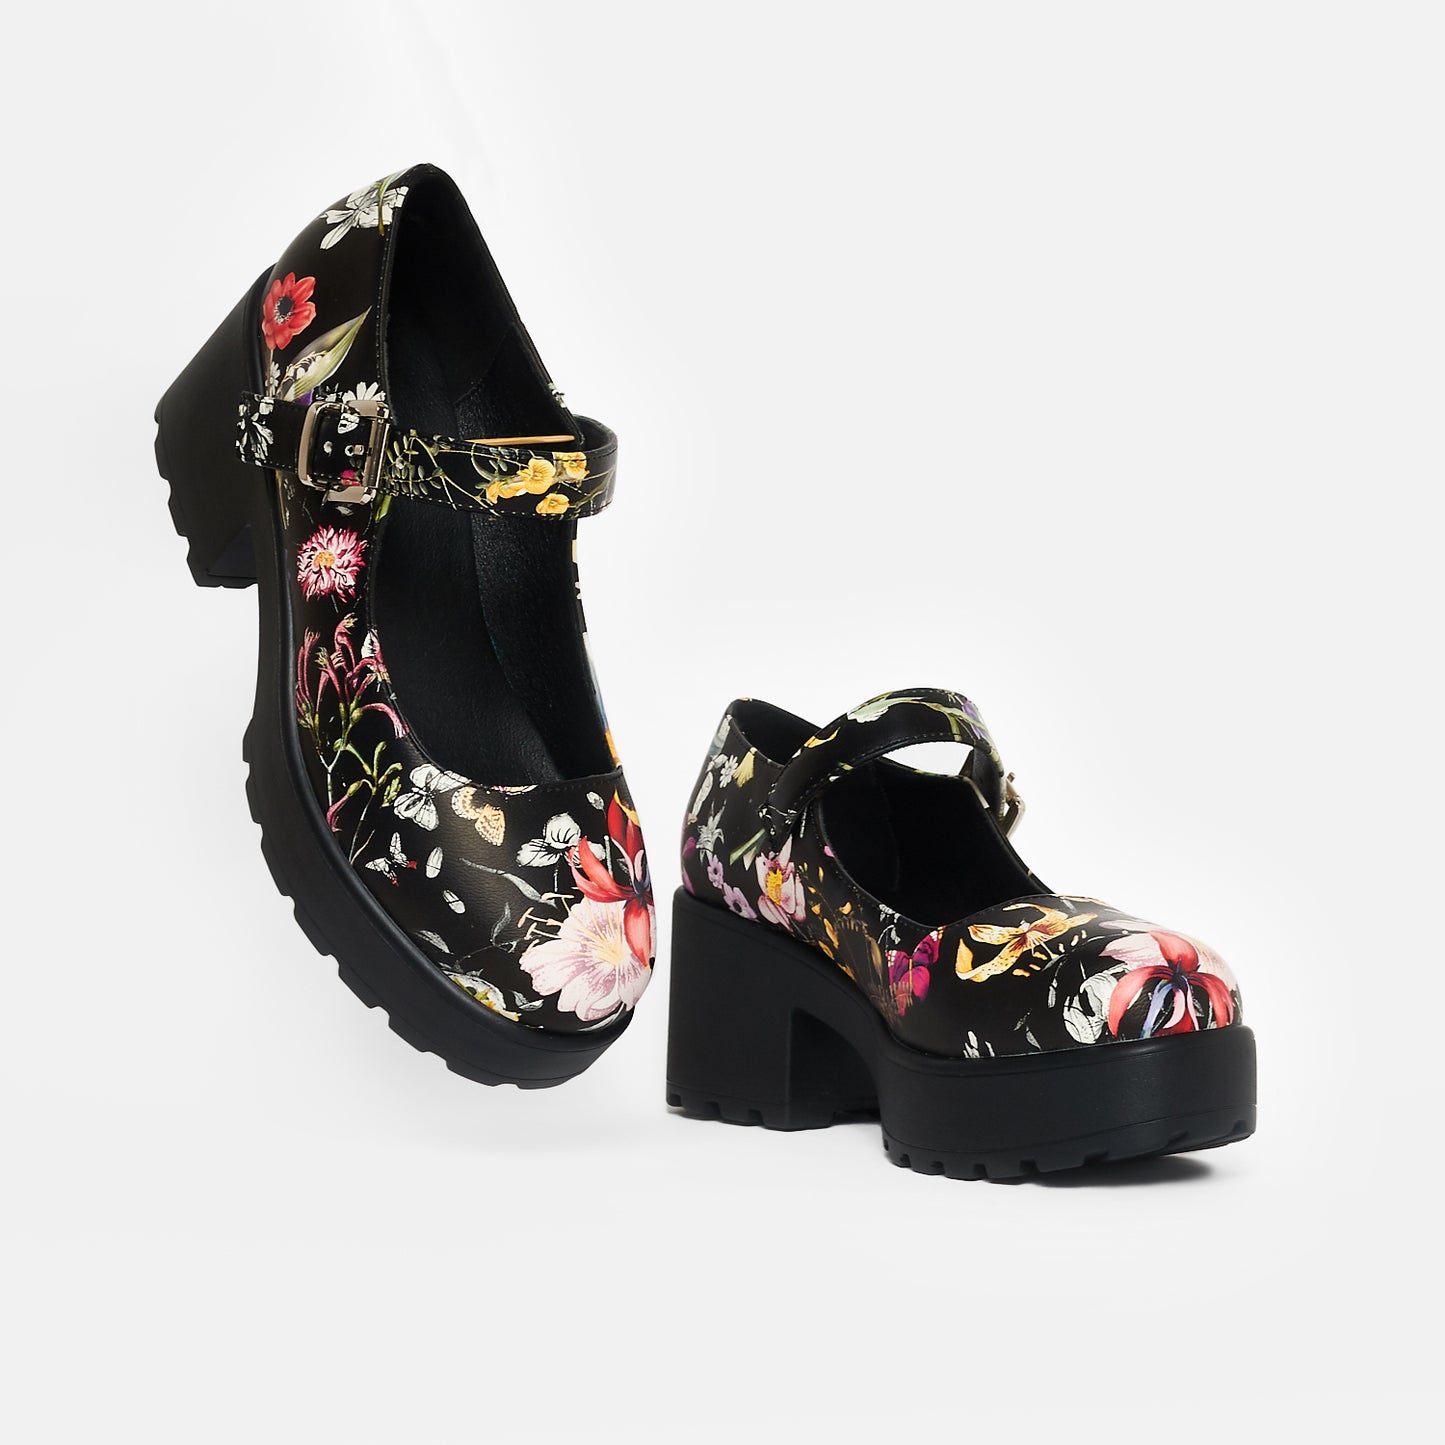 Tira Mary Jane Shoes 'Floral Edition' - Mary Janes - KOI Footwear - Black - Top Side View